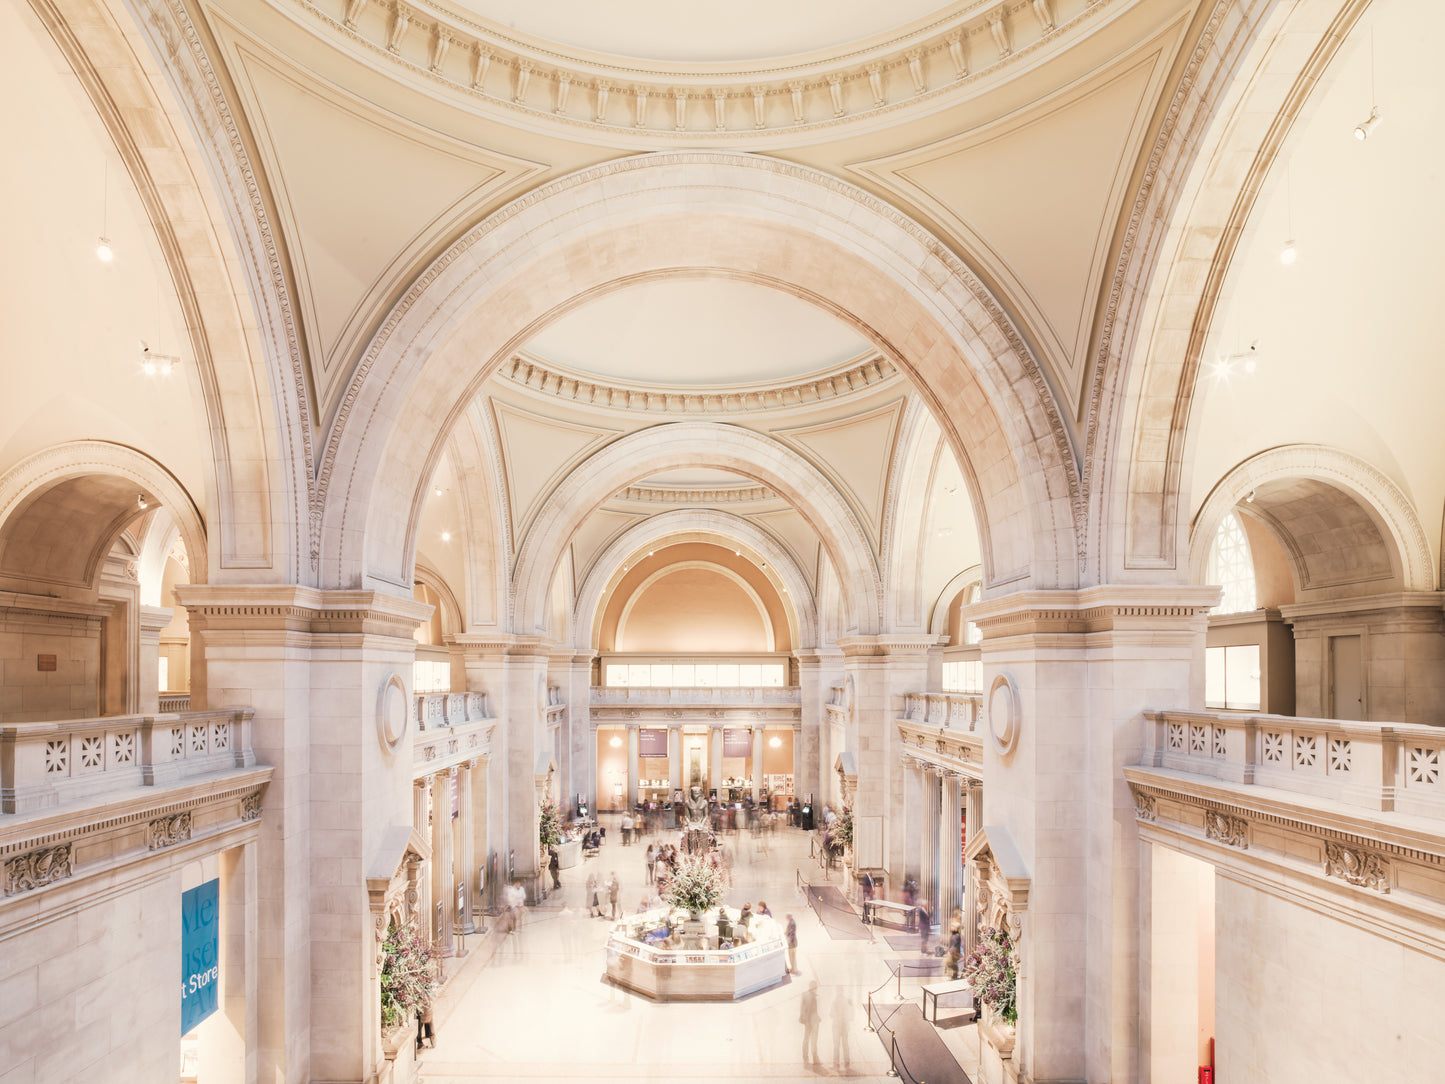 The Great Hall of The Metropolitan Museum of Art